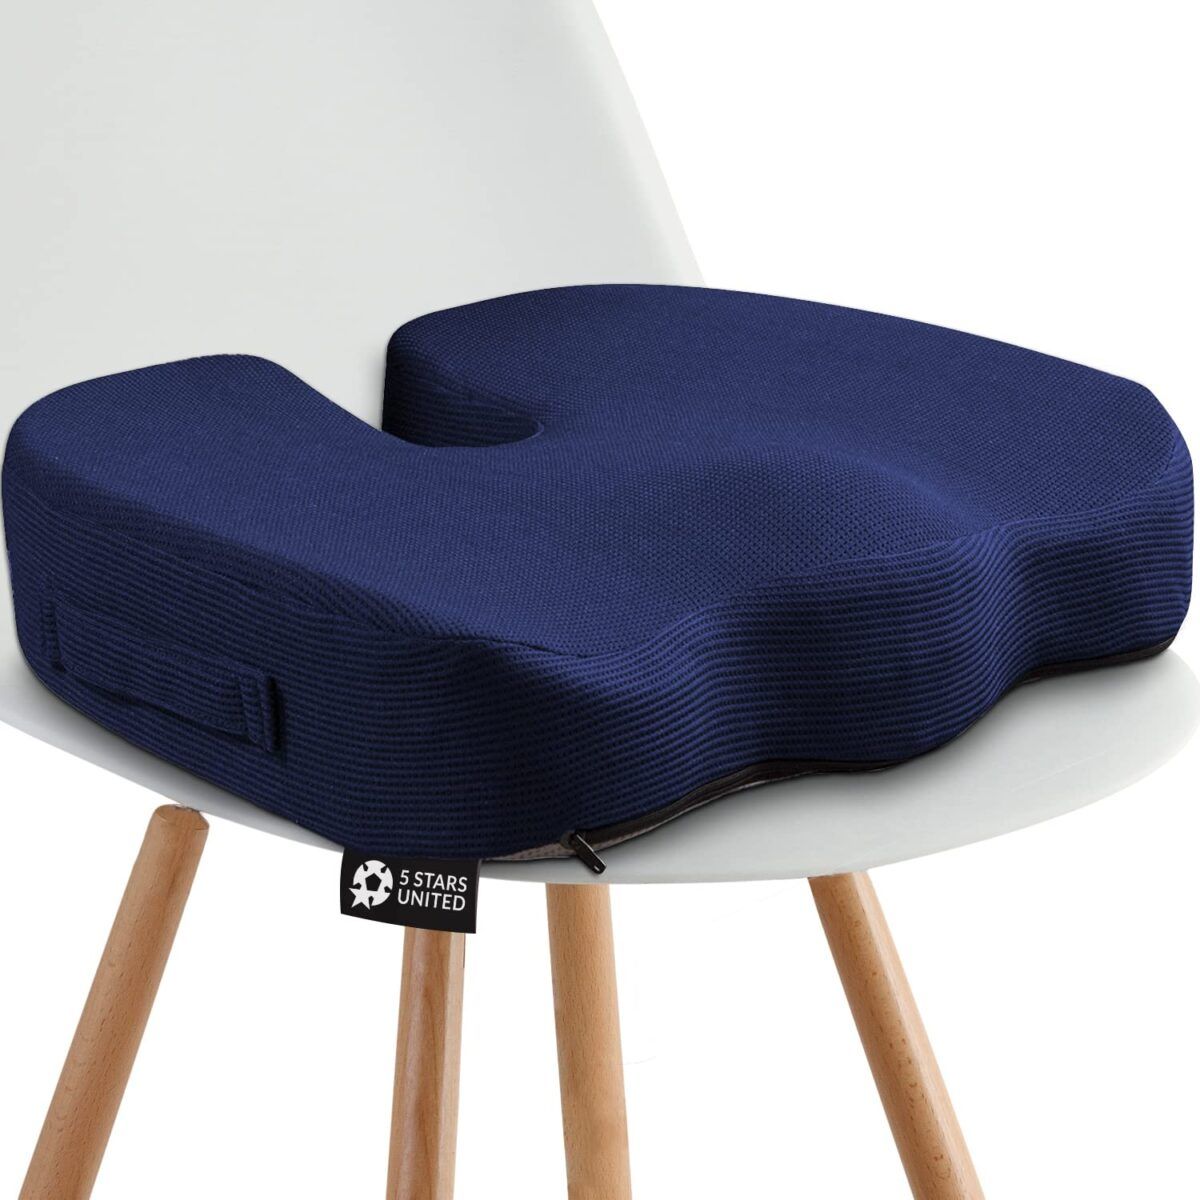 Special Needs Chair Seat Cushions to Improve Posture | Spiky Tactile Cushion